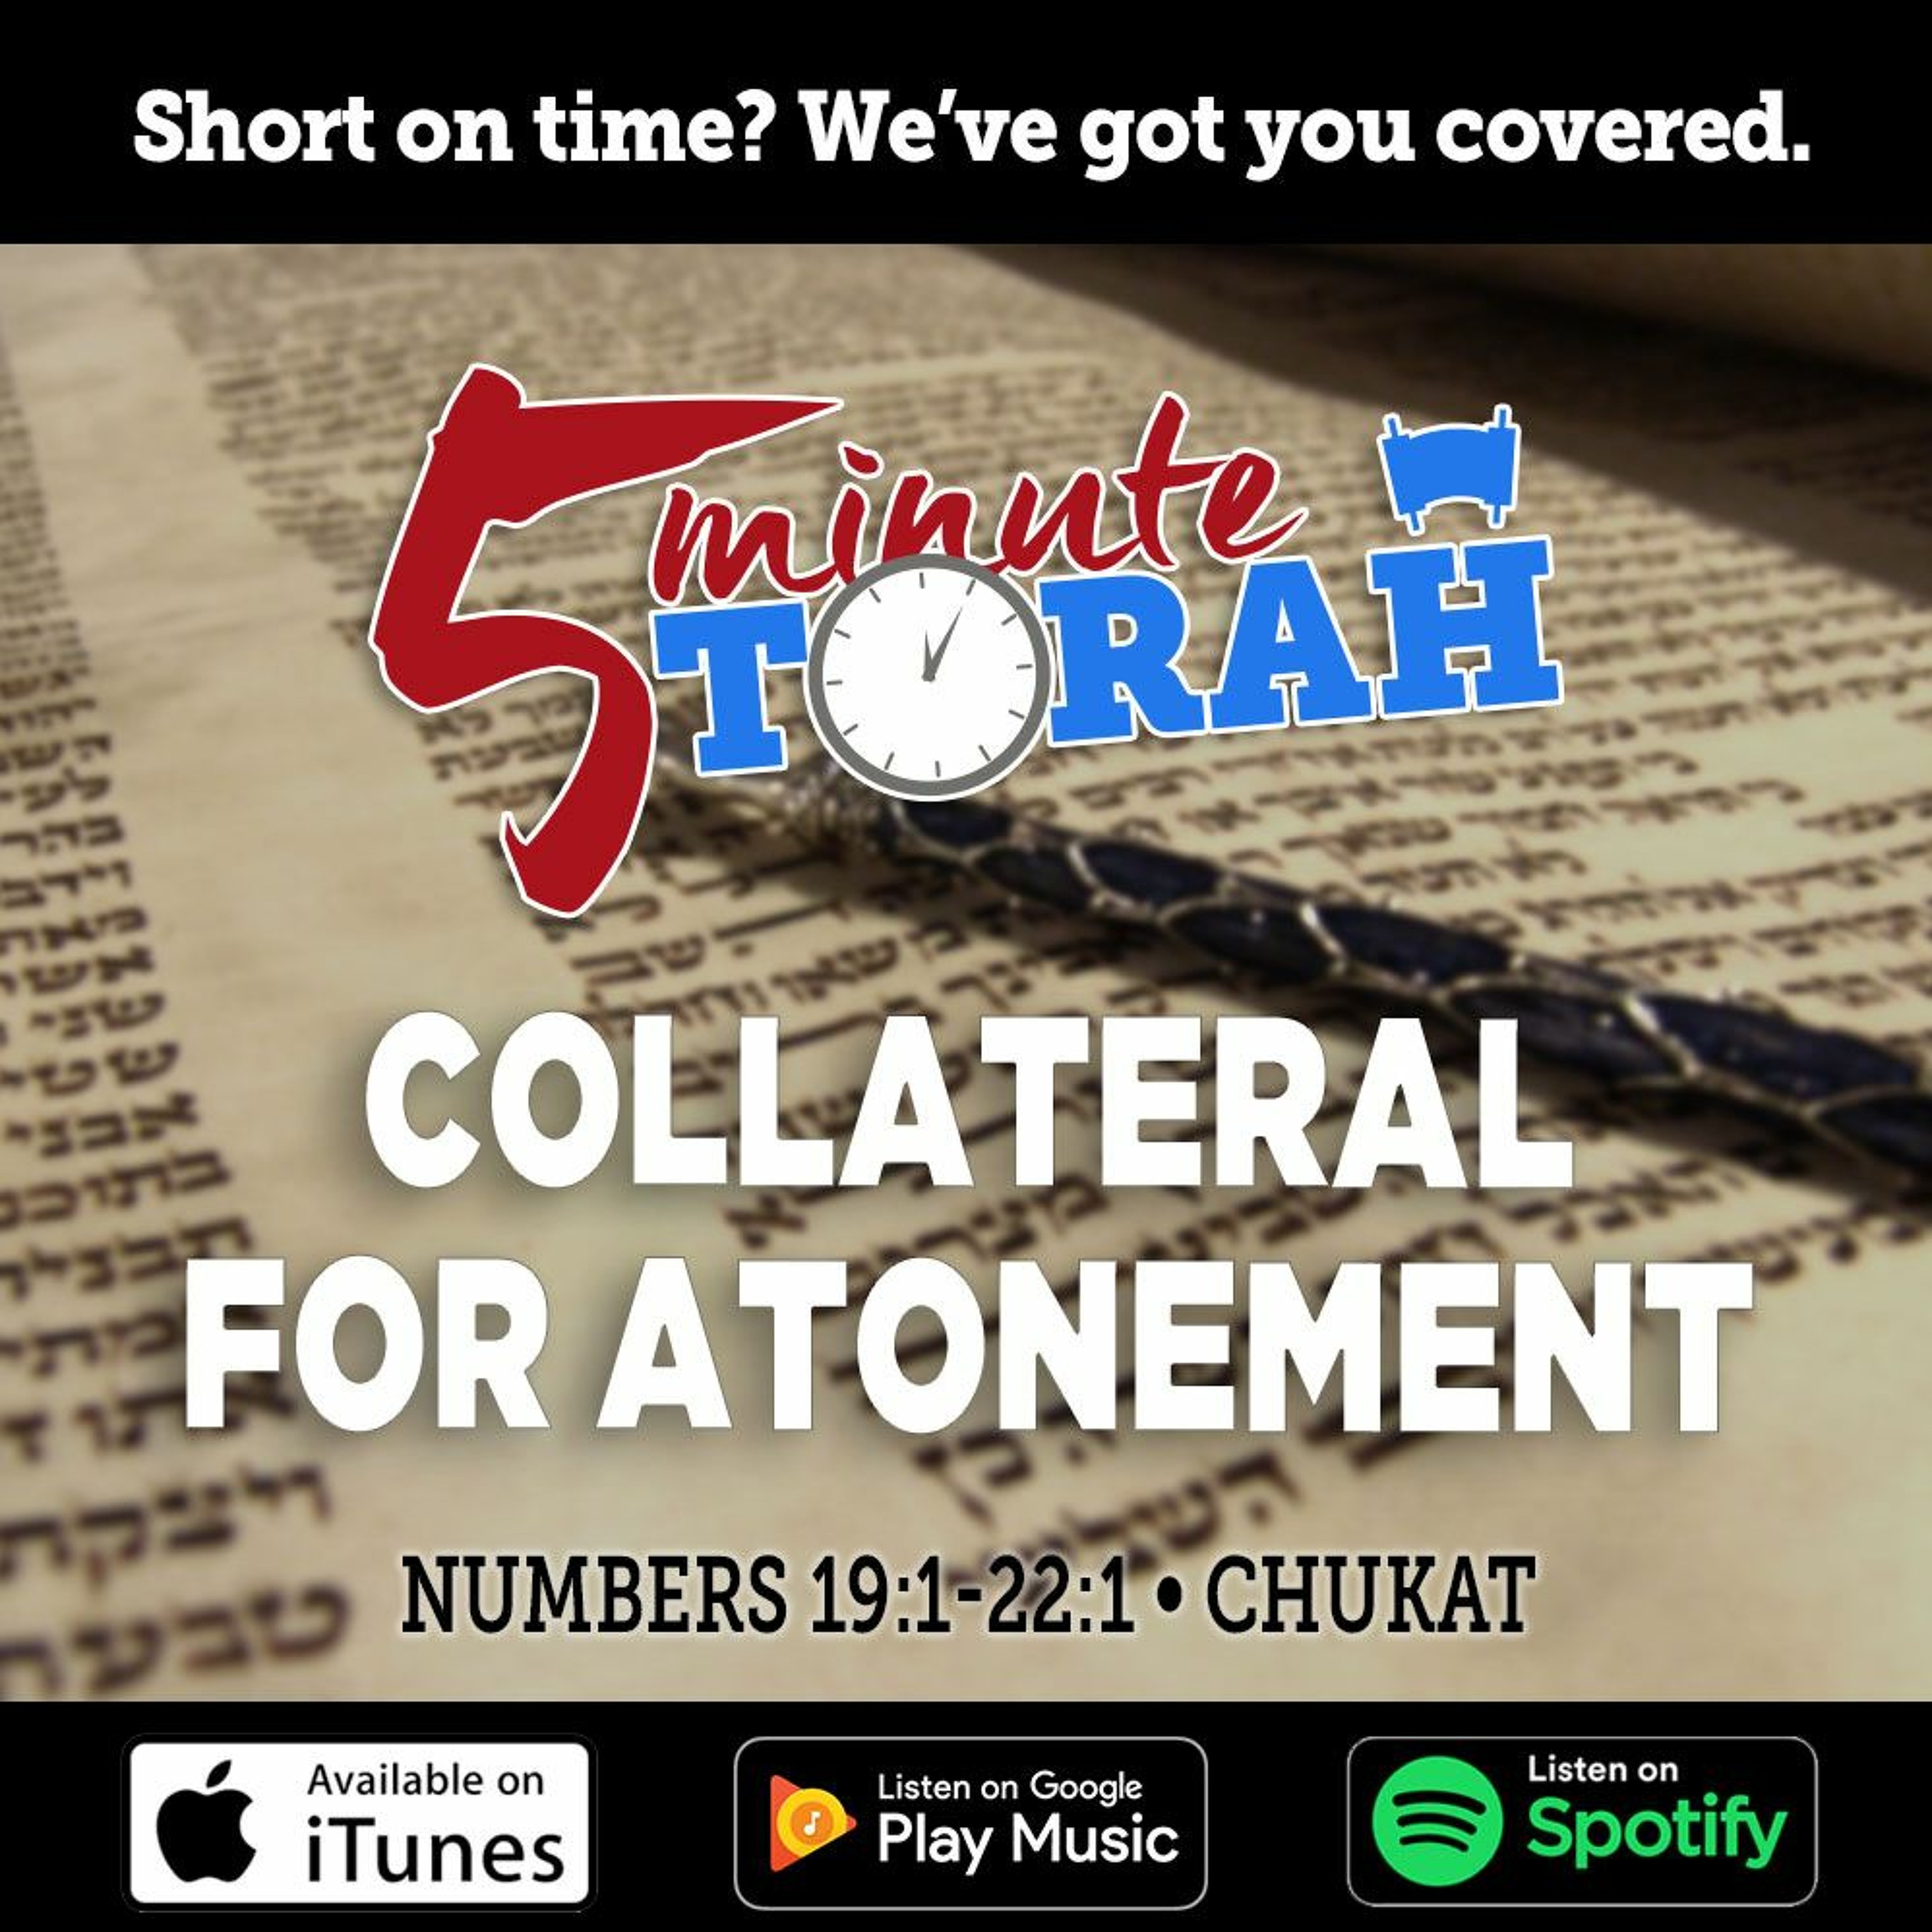 Chukat - Collateral For Atonement